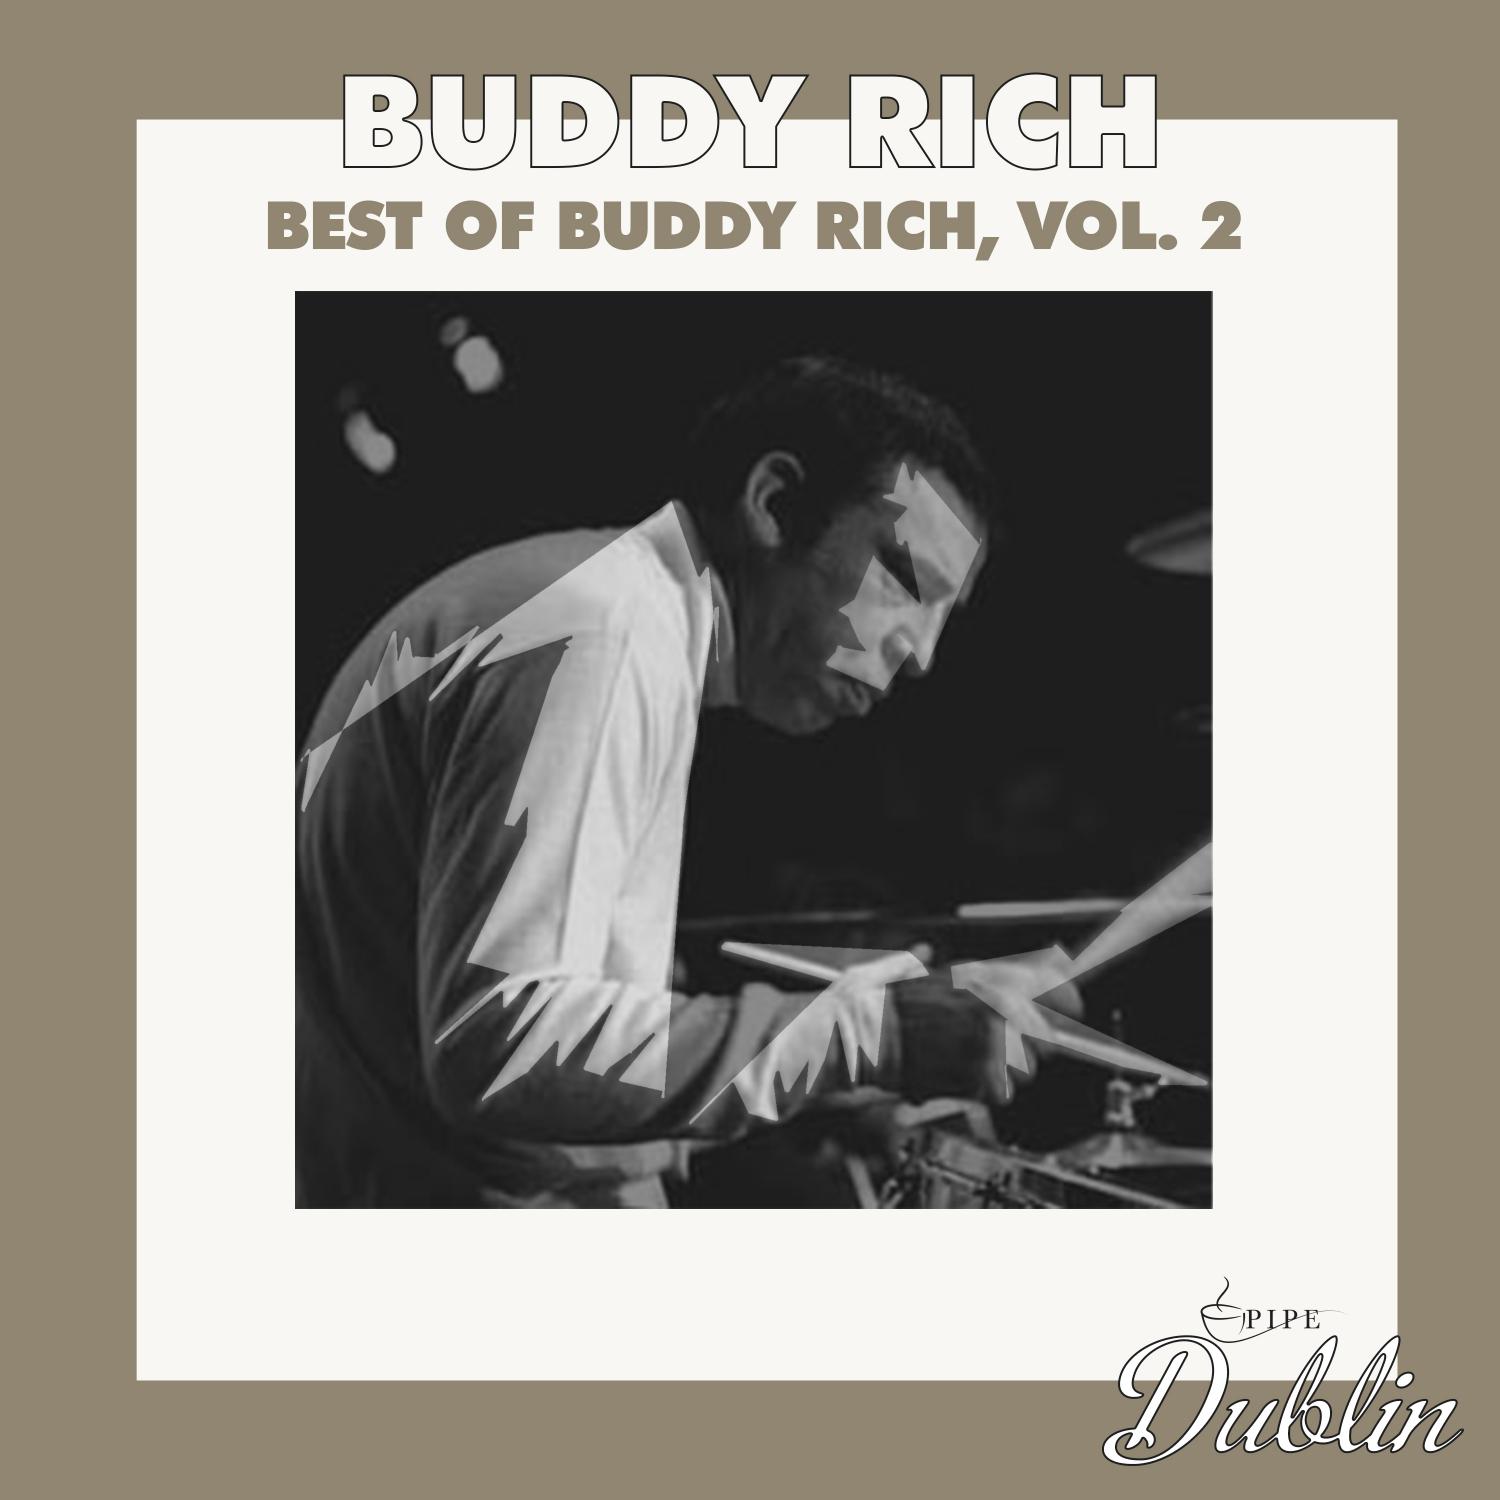 Buddy Rich - Wrap Your Troubles in Dreams